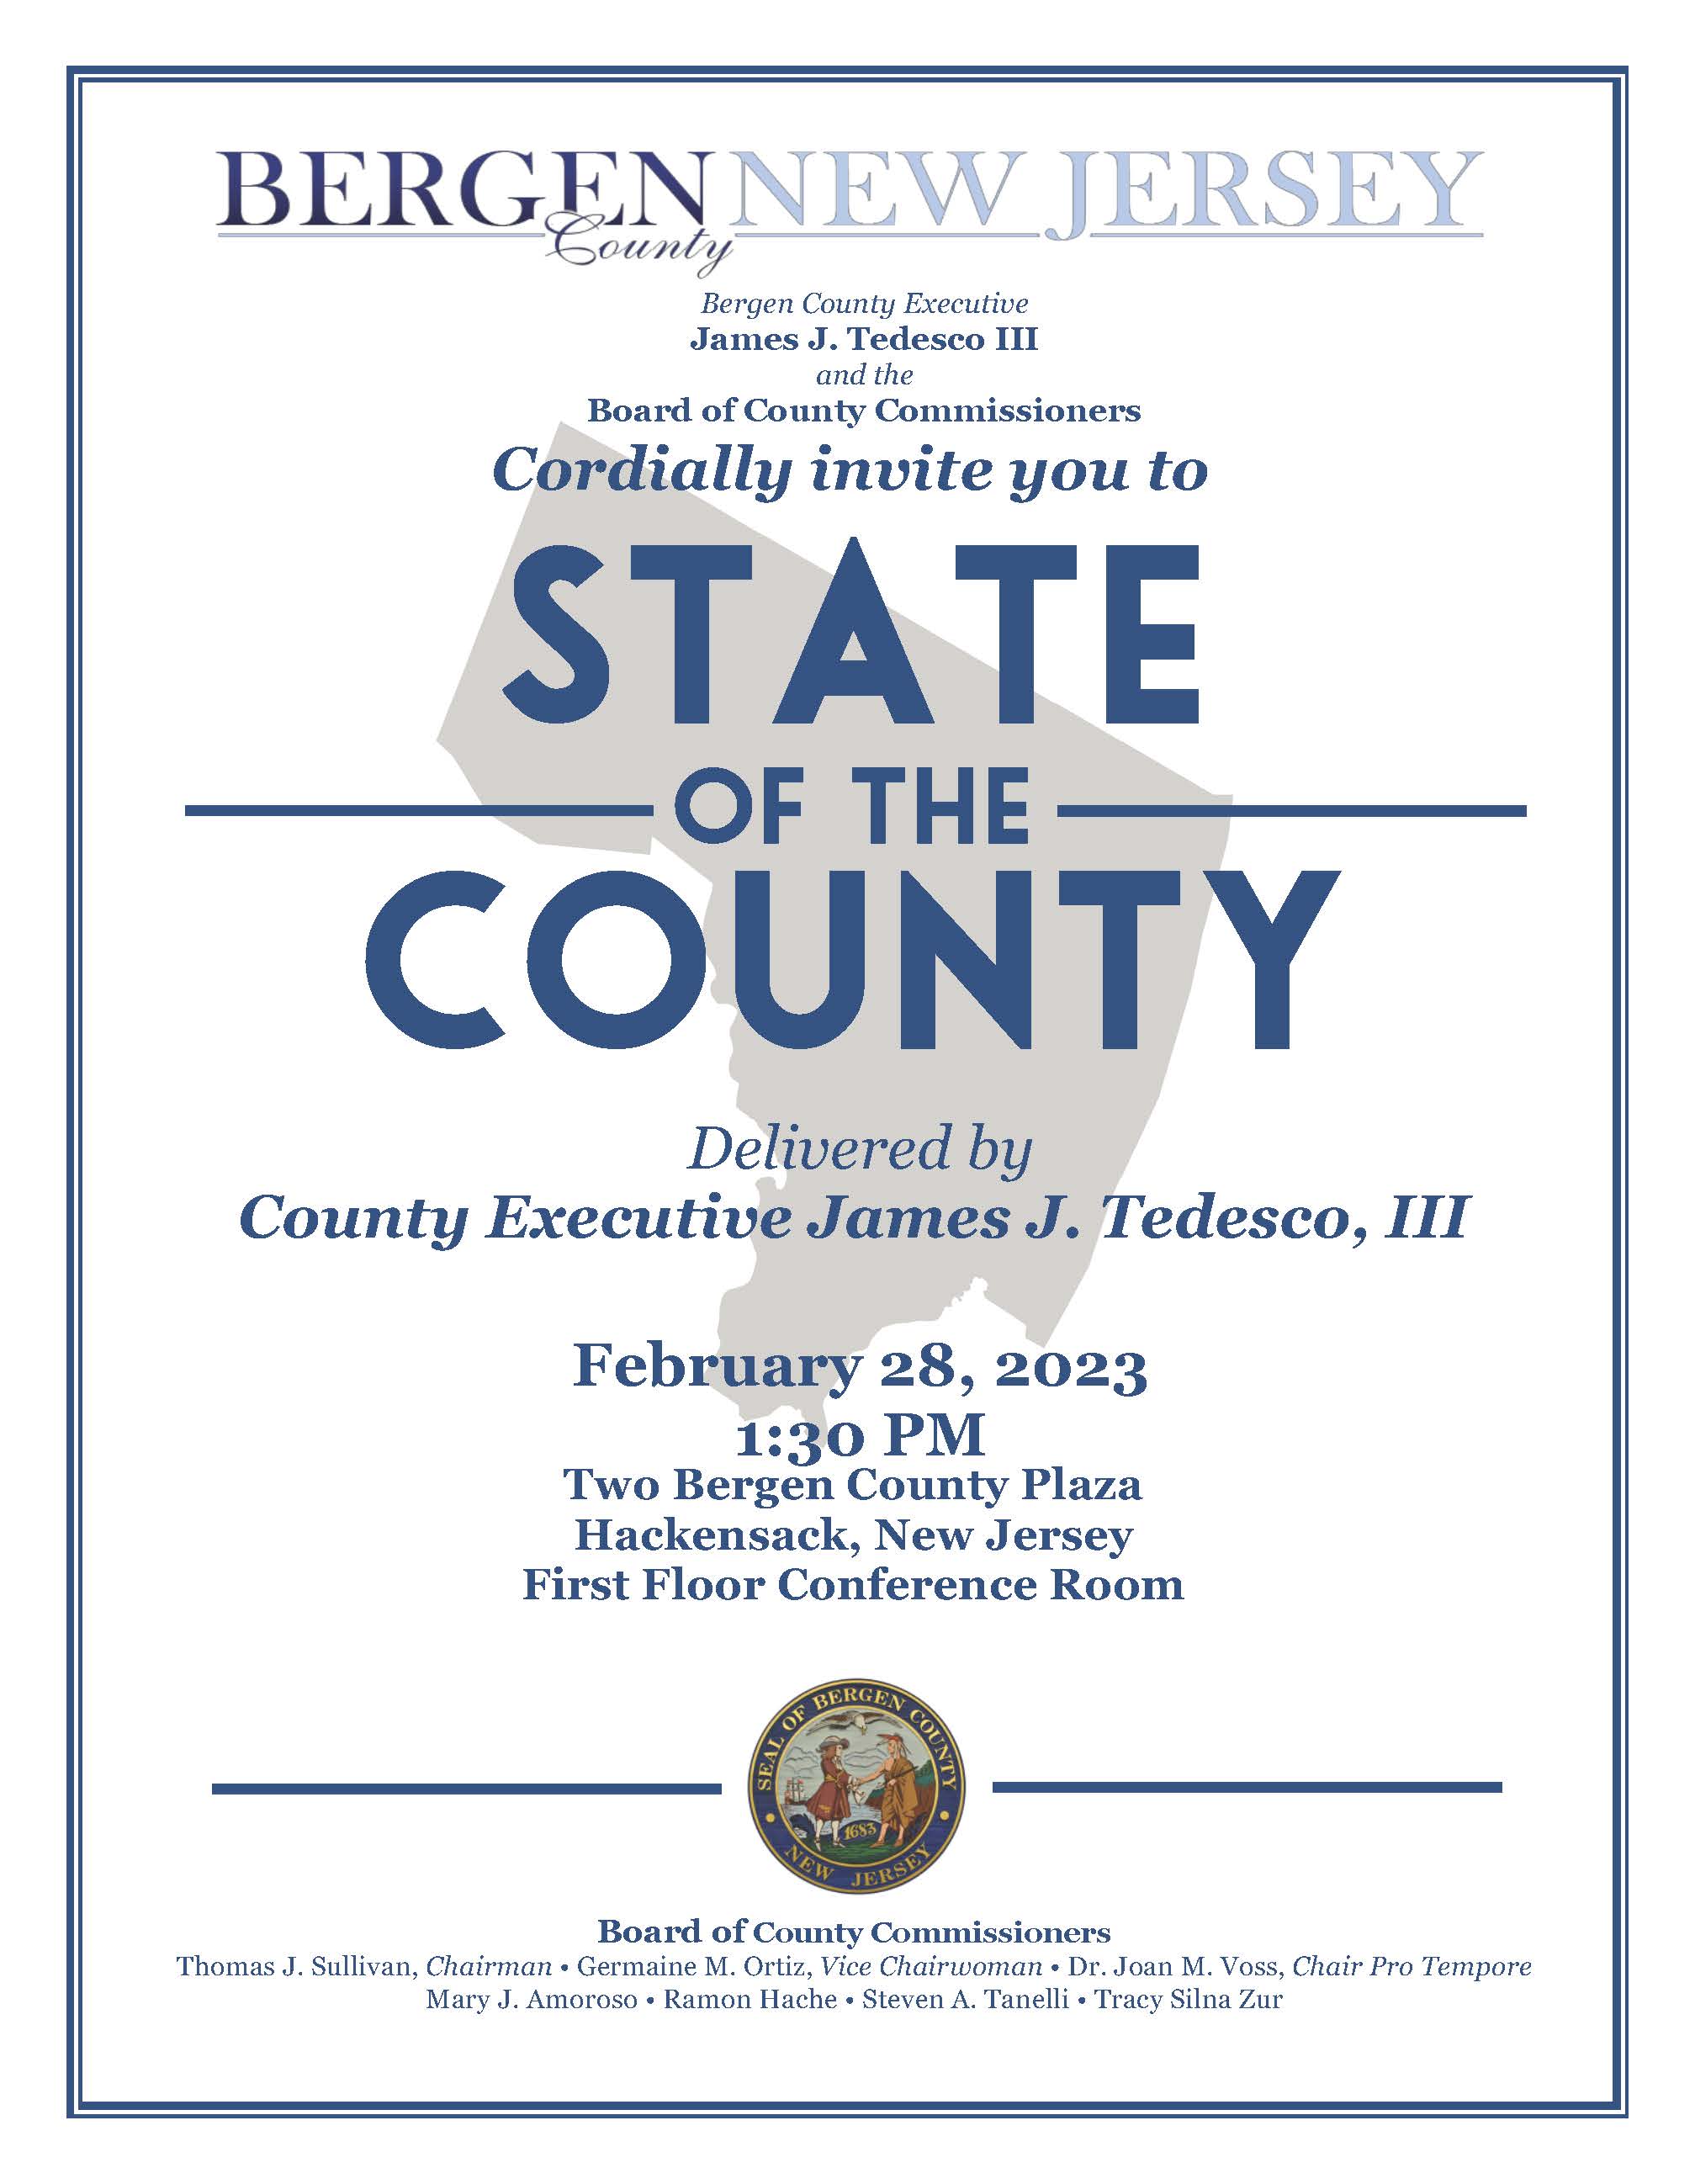 State of the County2023